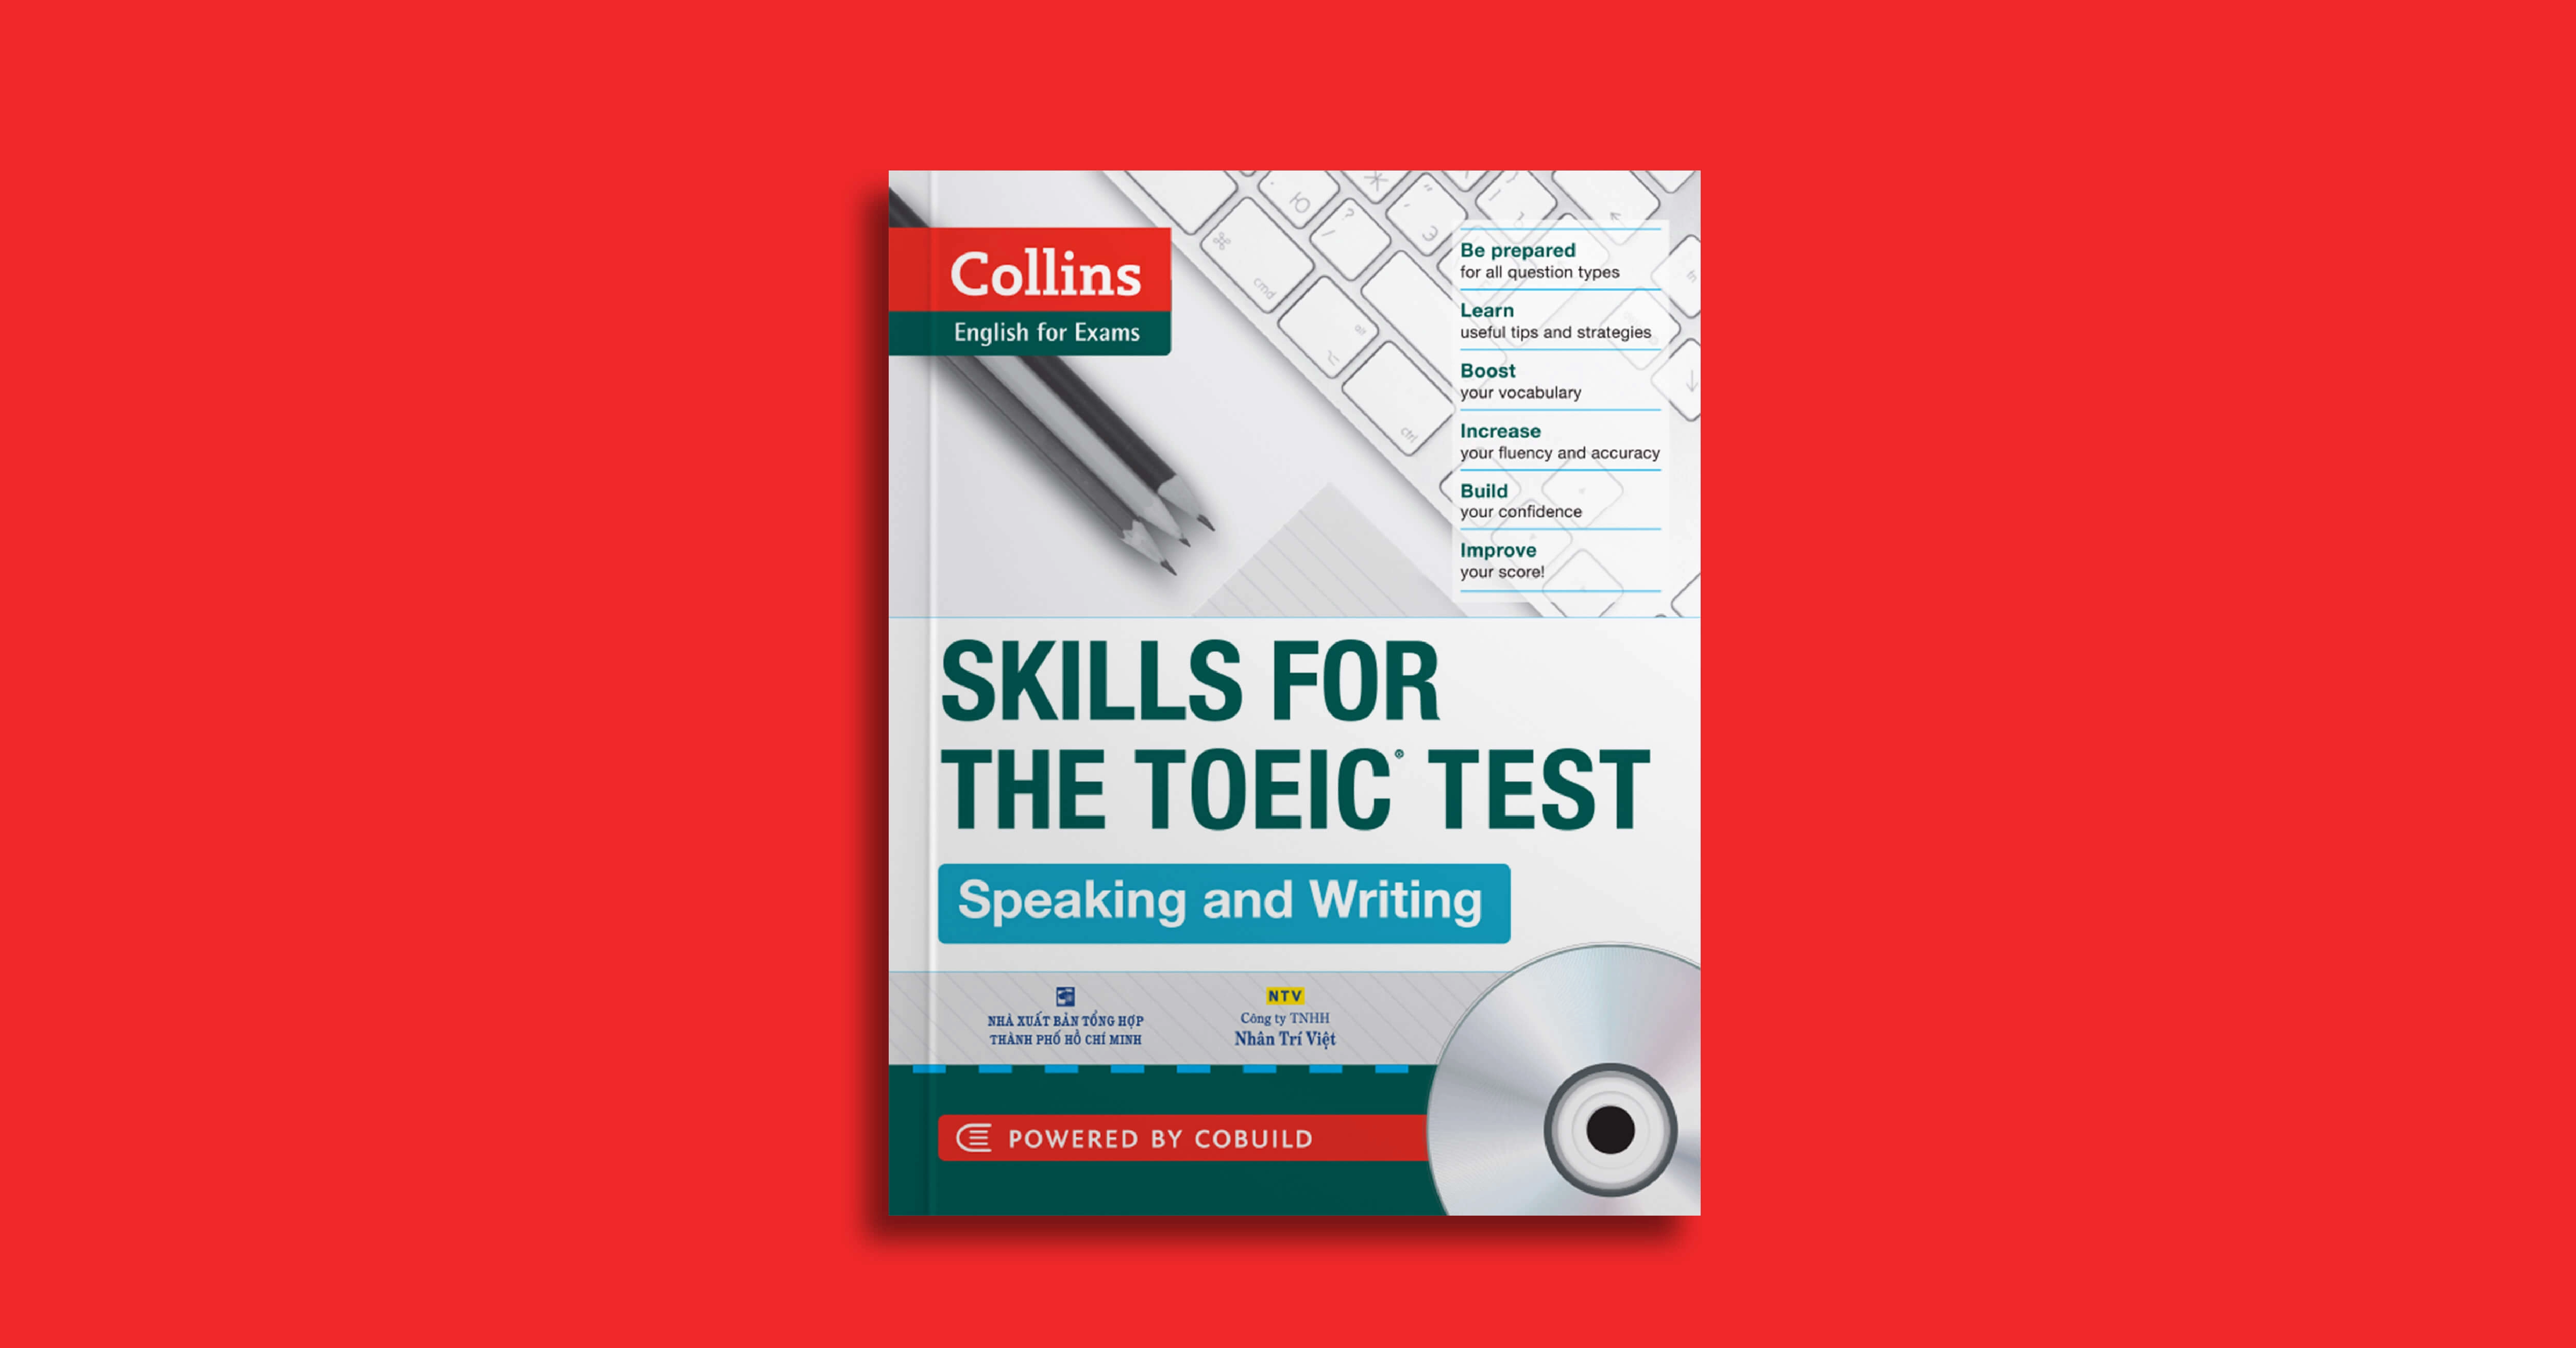 collins-skills-for-the-toeic-test-writing-and-speaking-review-va-huong-dan-su-dung-sach